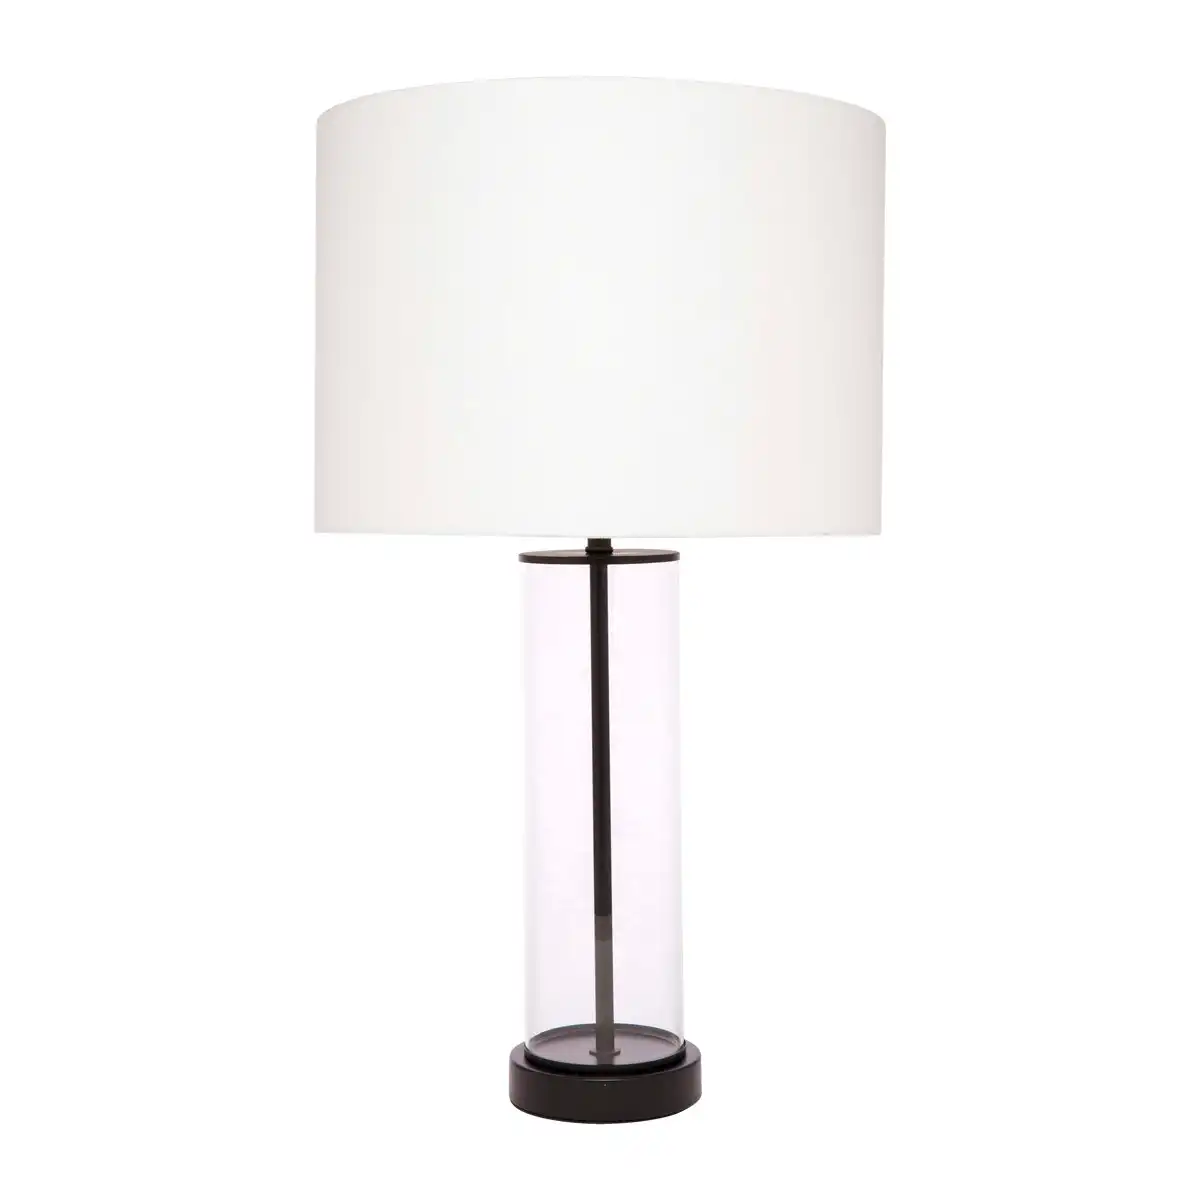 Cafe Lighting East Side Table Lamp - Black with White Shade